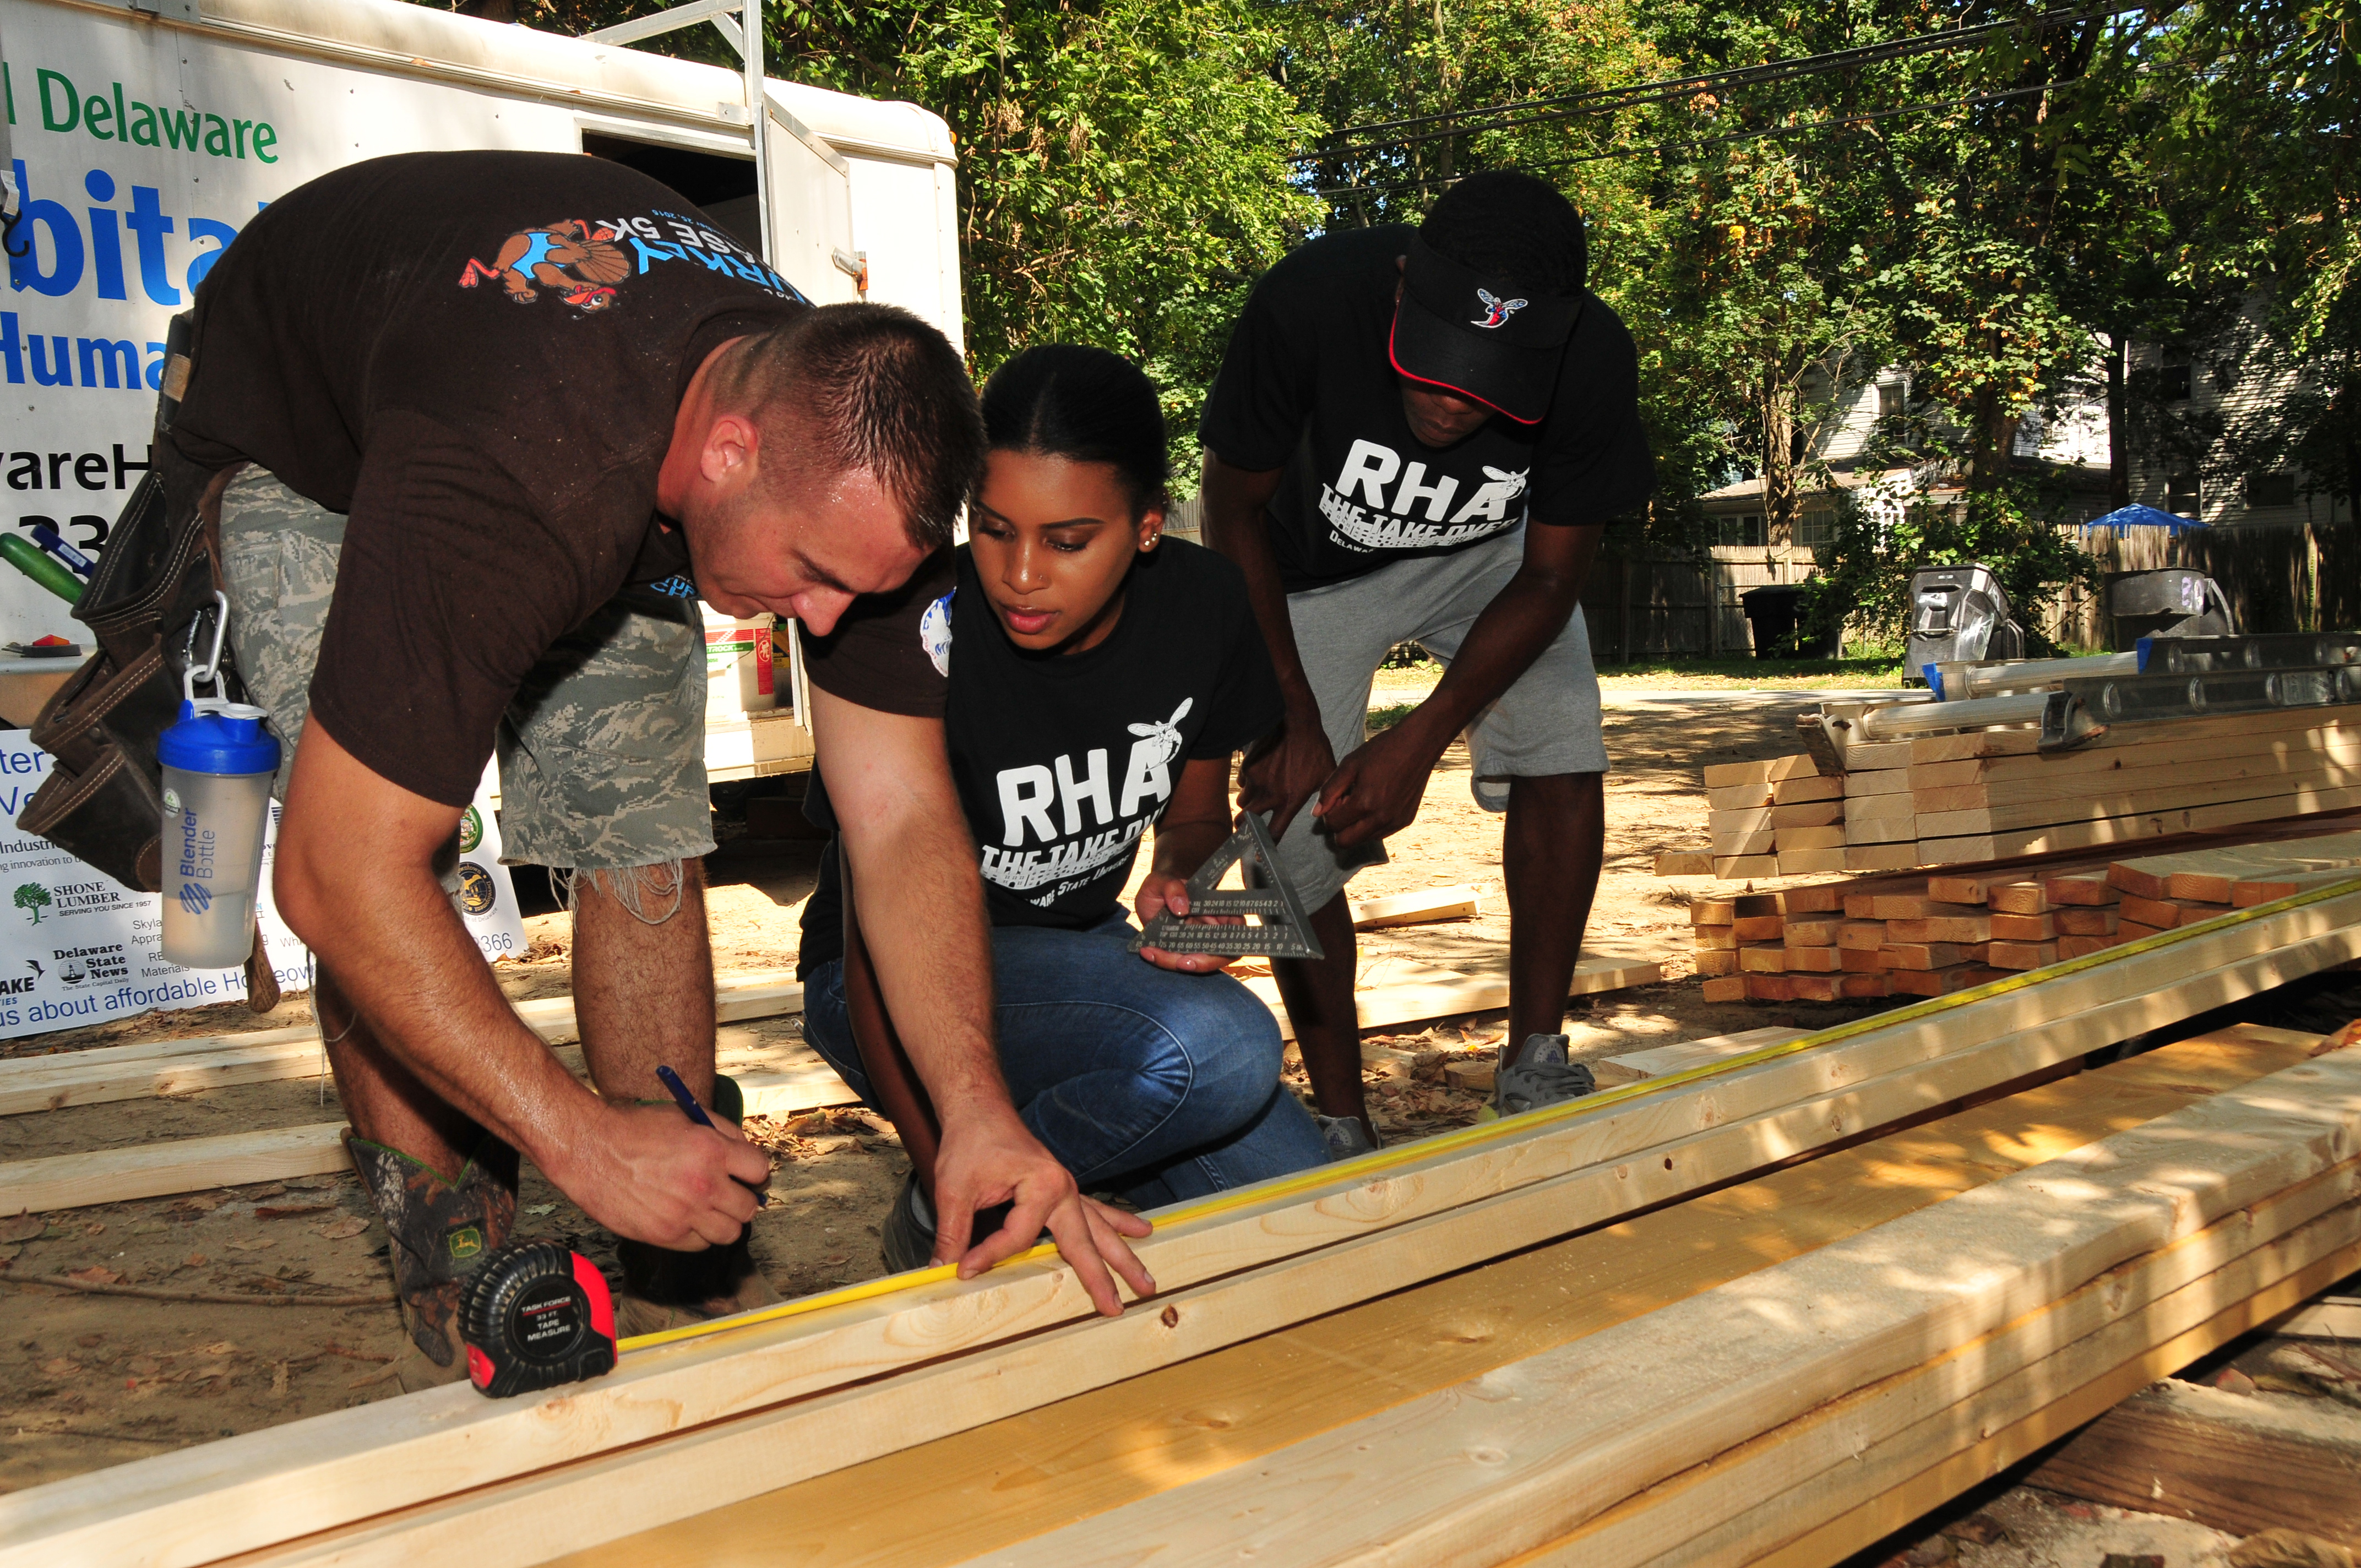 The photo of DSU Residential Housing Association students working with Habitat for Humanity in the fall 2016 shows the spirit "Of Service" that Dr. Tony Allen describes at DSU in this editorial.